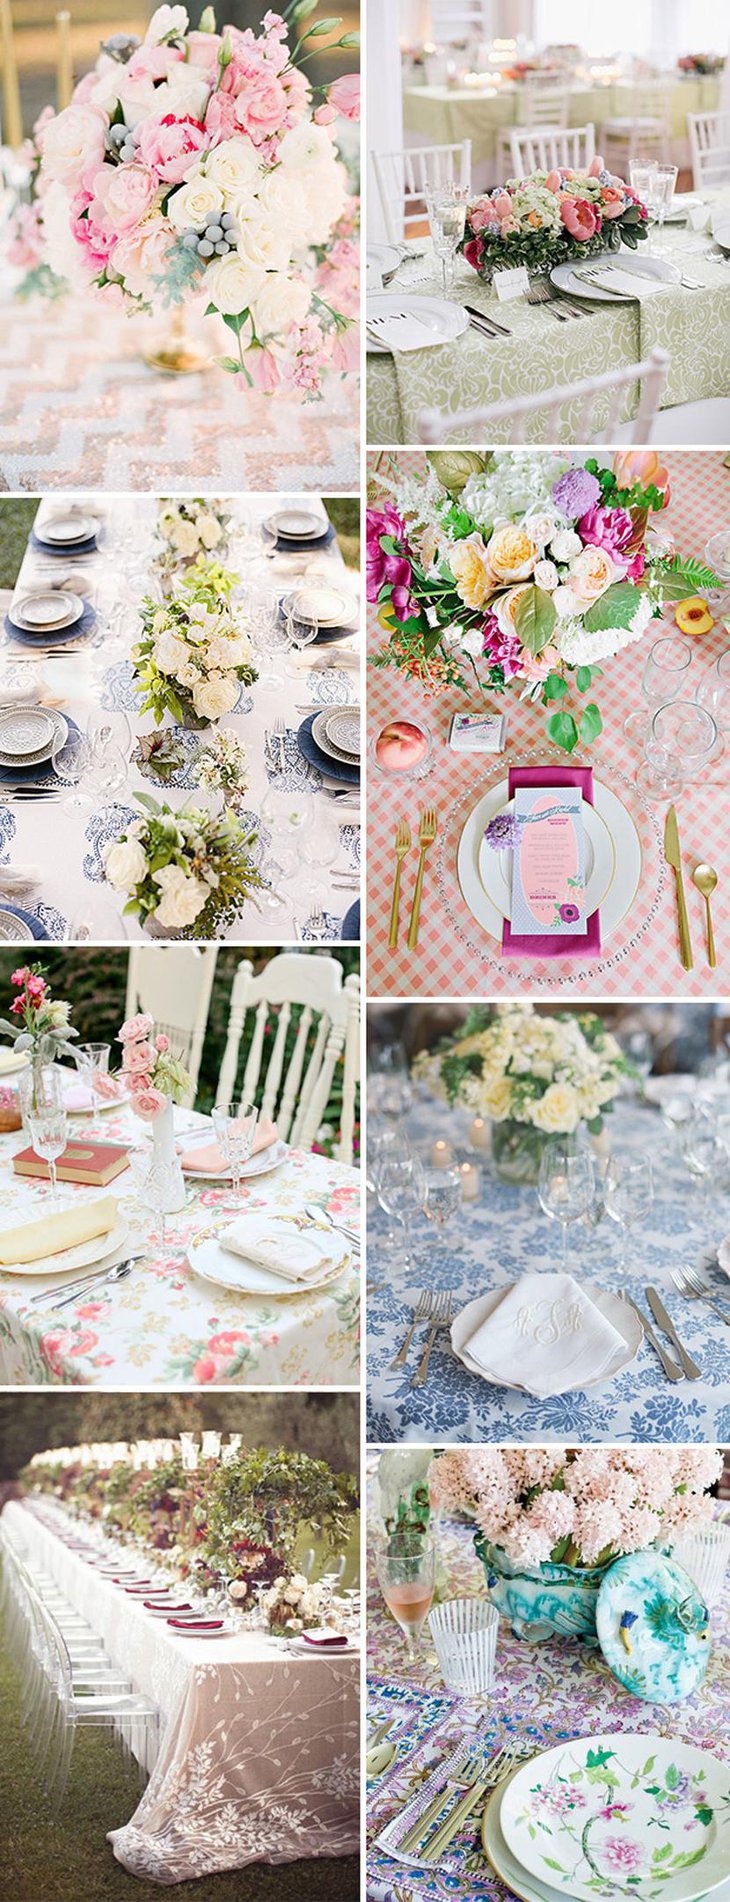 Attractive Patterned Table Linens for Weddings